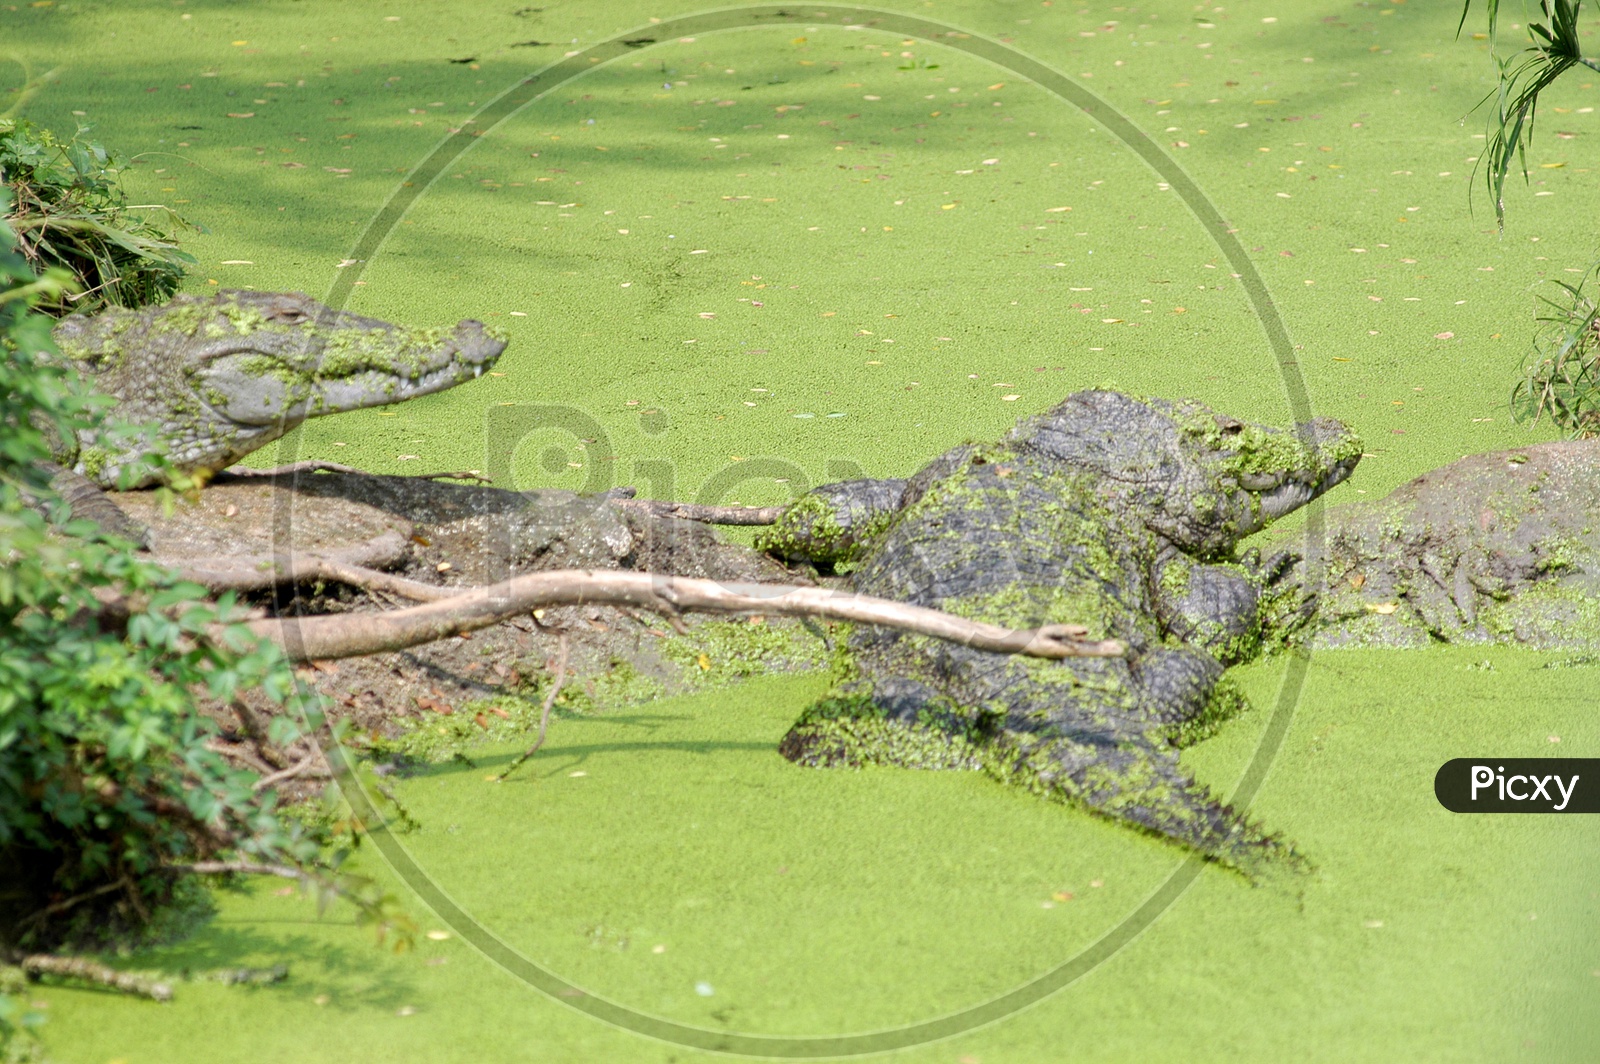 Crocodiles in the water covered with moss